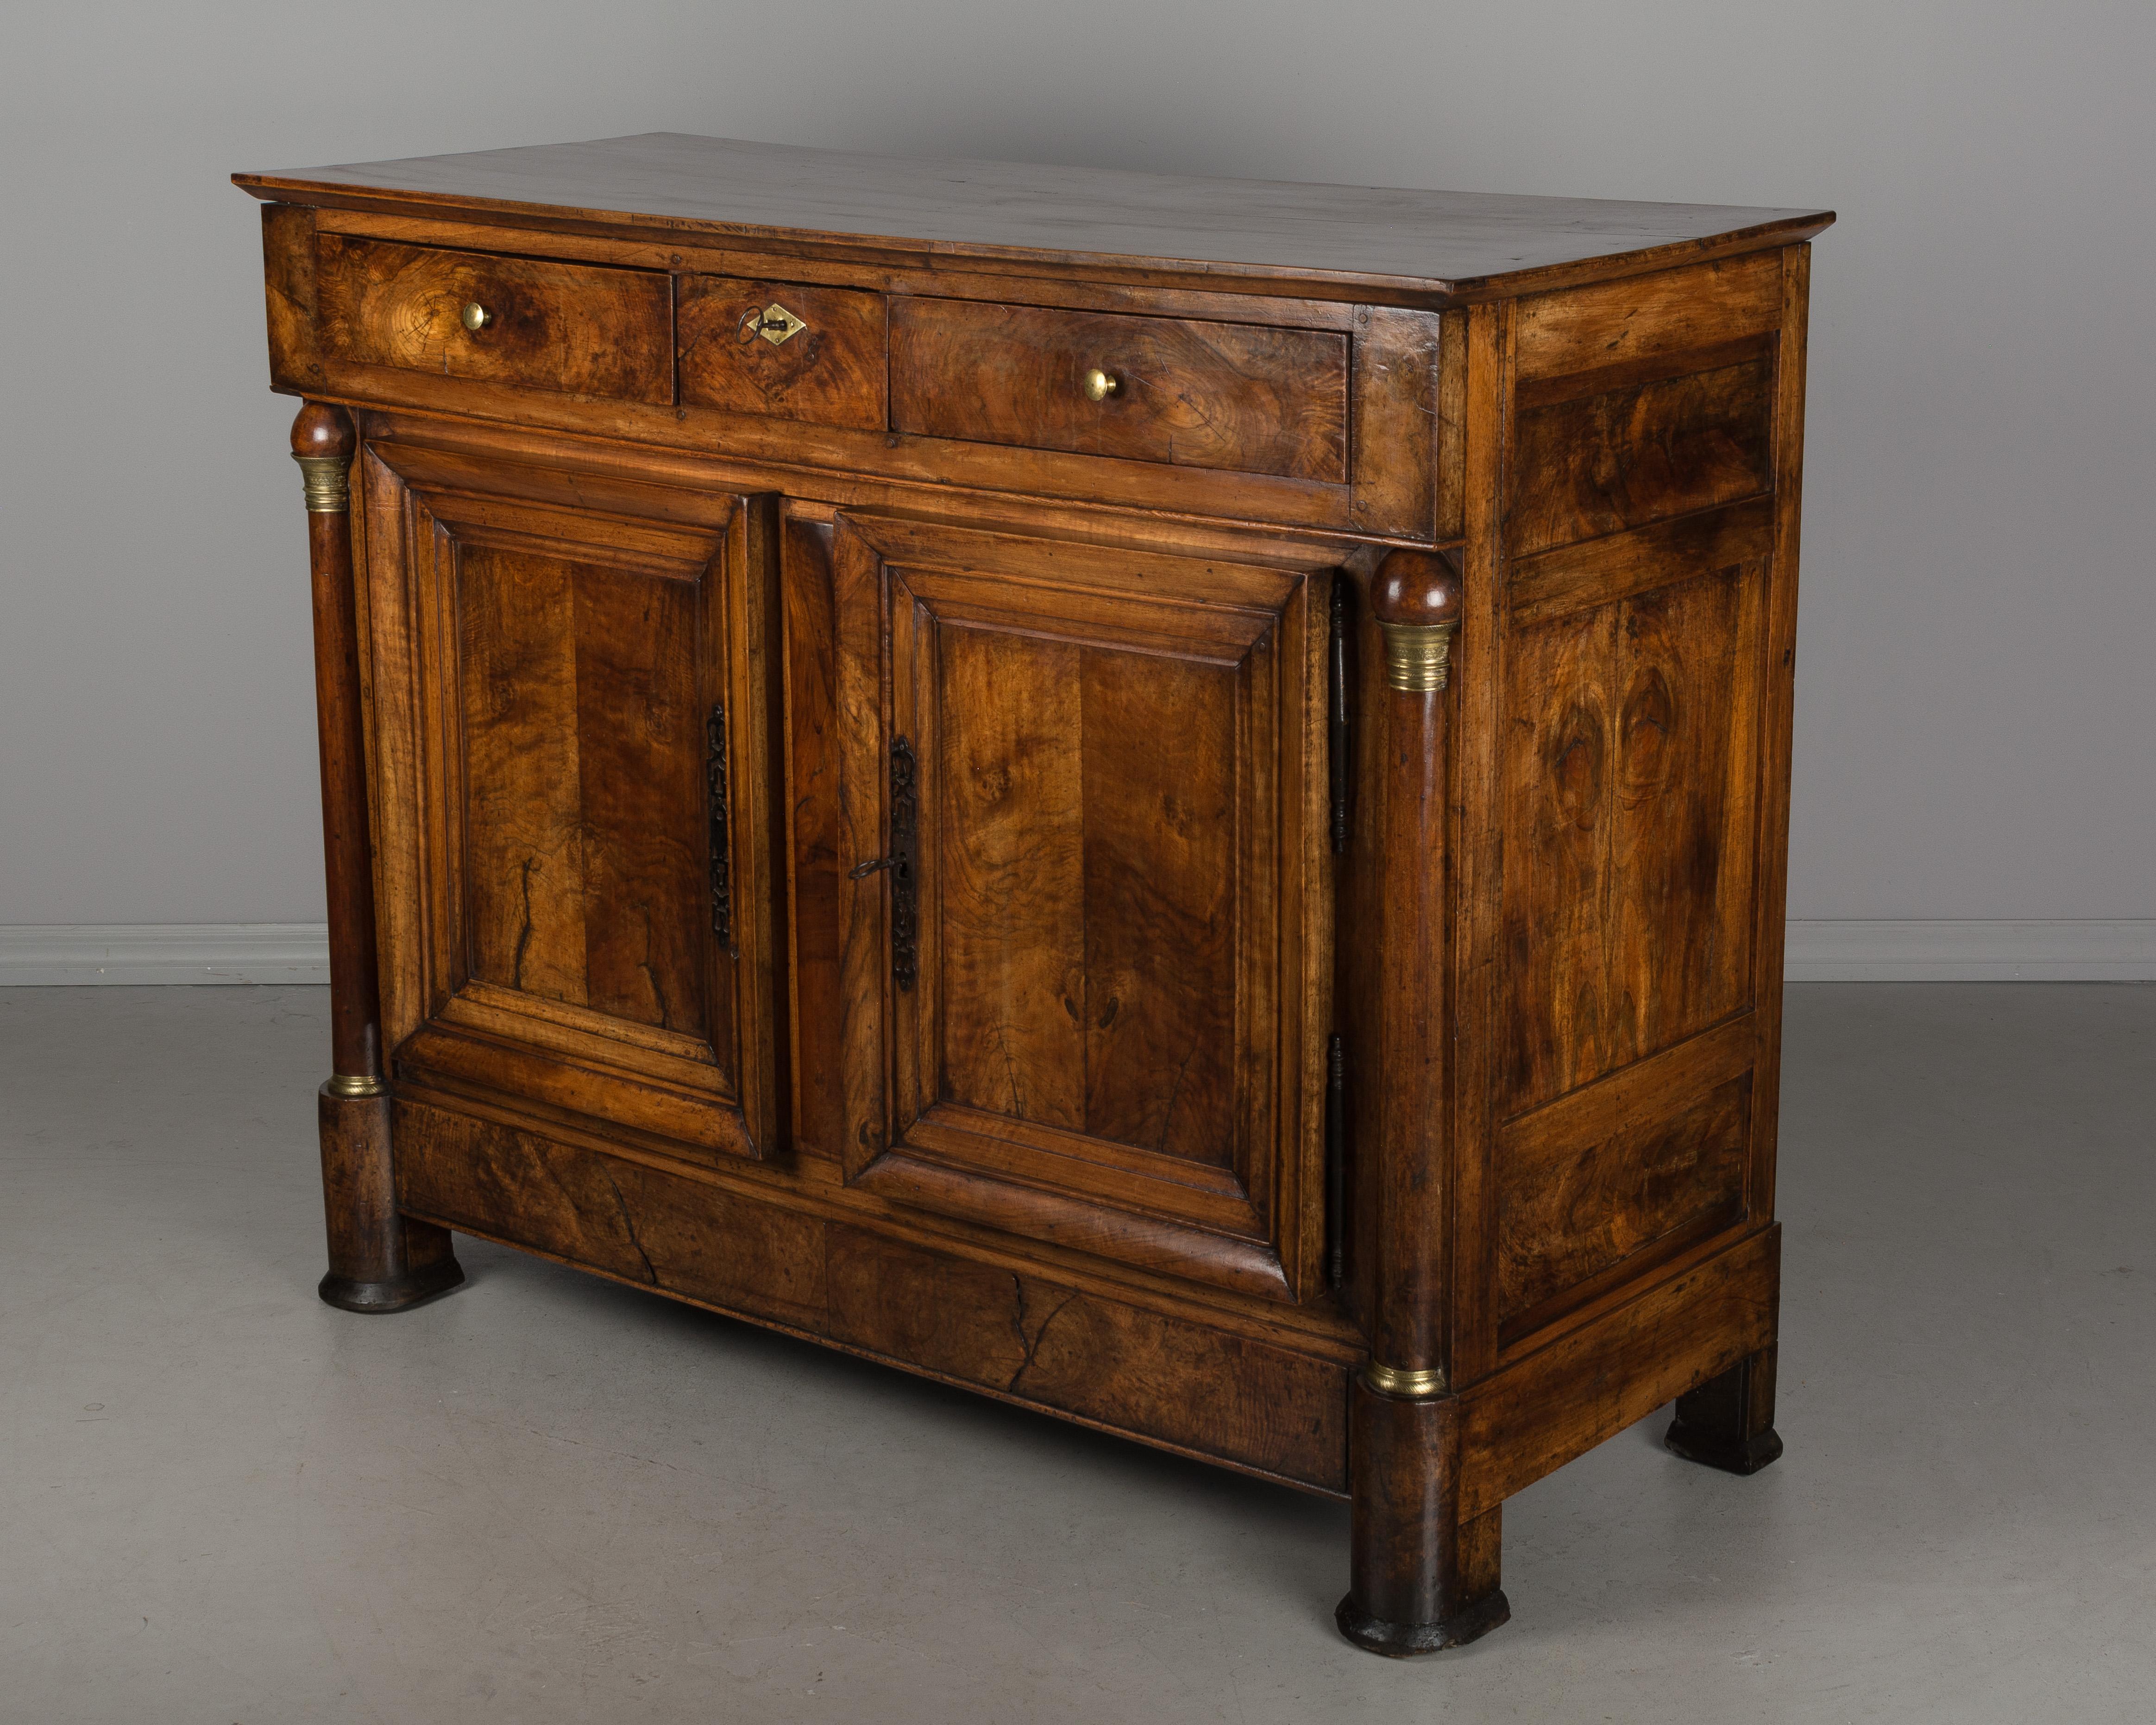 A large early 19th century French Empire Period buffet made of solid walnut from the Burgundy Province. Bronze mounted columns flank thick book-matched panel doors. Three dovetailed drawers. Working locks and two keys. The sides each have three